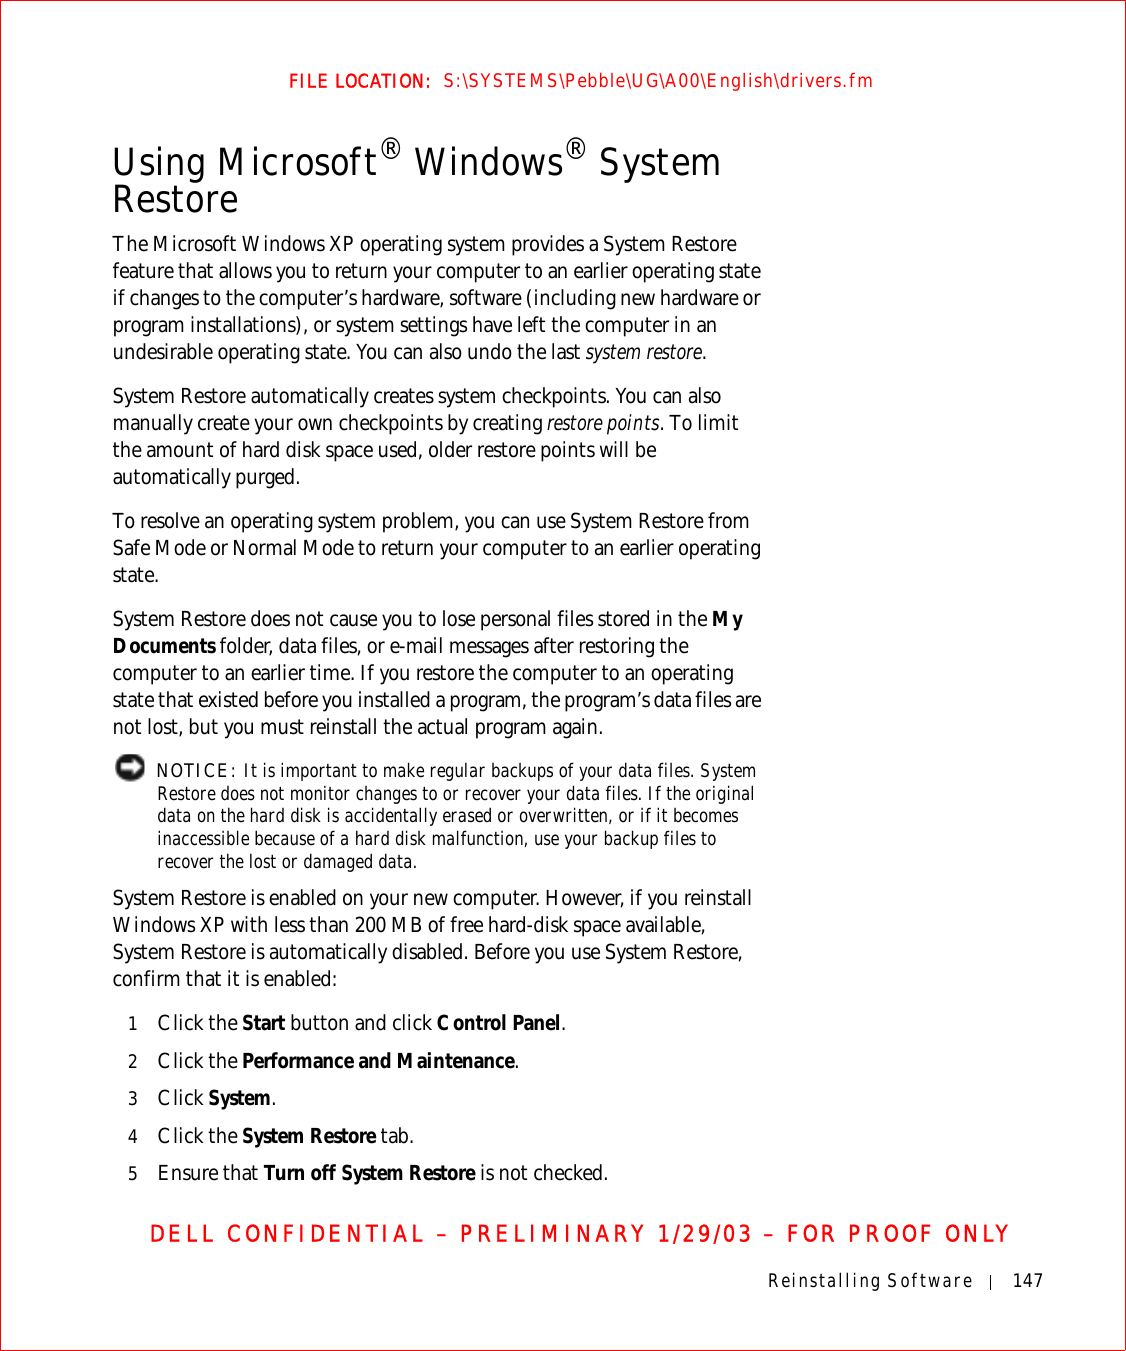 Reinstalling Software 147FILE LOCATION:  S:\SYSTEMS\Pebble\UG\A00\English\drivers.fmDELL CONFIDENTIAL – PRELIMINARY 1/29/03 – FOR PROOF ONLYUsing Microsoft® Windows® System RestoreThe Microsoft Windows XP operating system provides a System Restore feature that allows you to return your computer to an earlier operating state if changes to the computer’s hardware, software (including new hardware or program installations), or system settings have left the computer in an undesirable operating state. You can also undo the last system restore.System Restore automatically creates system checkpoints. You can also manually create your own checkpoints by creating restore points. To limit the amount of hard disk space used, older restore points will be automatically purged.To resolve an operating system problem, you can use System Restore from Safe Mode or Normal Mode to return your computer to an earlier operating state.System Restore does not cause you to lose personal files stored in the My Documents folder, data files, or e-mail messages after restoring the computer to an earlier time. If you restore the computer to an operating state that existed before you installed a program, the program’s data files are not lost, but you must reinstall the actual program again.  NOTICE: It is important to make regular backups of your data files. System Restore does not monitor changes to or recover your data files. If the original data on the hard disk is accidentally erased or overwritten, or if it becomes inaccessible because of a hard disk malfunction, use your backup files to recover the lost or damaged data.System Restore is enabled on your new computer. However, if you reinstall Windows XP with less than 200 MB of free hard-disk space available, System Restore is automatically disabled. Before you use System Restore, confirm that it is enabled:1Click the Start button and click Control Panel. 2Click the Performance and Maintenance.3Click System.4Click the System Restore tab.5Ensure that Turn off System Restore is not checked. 